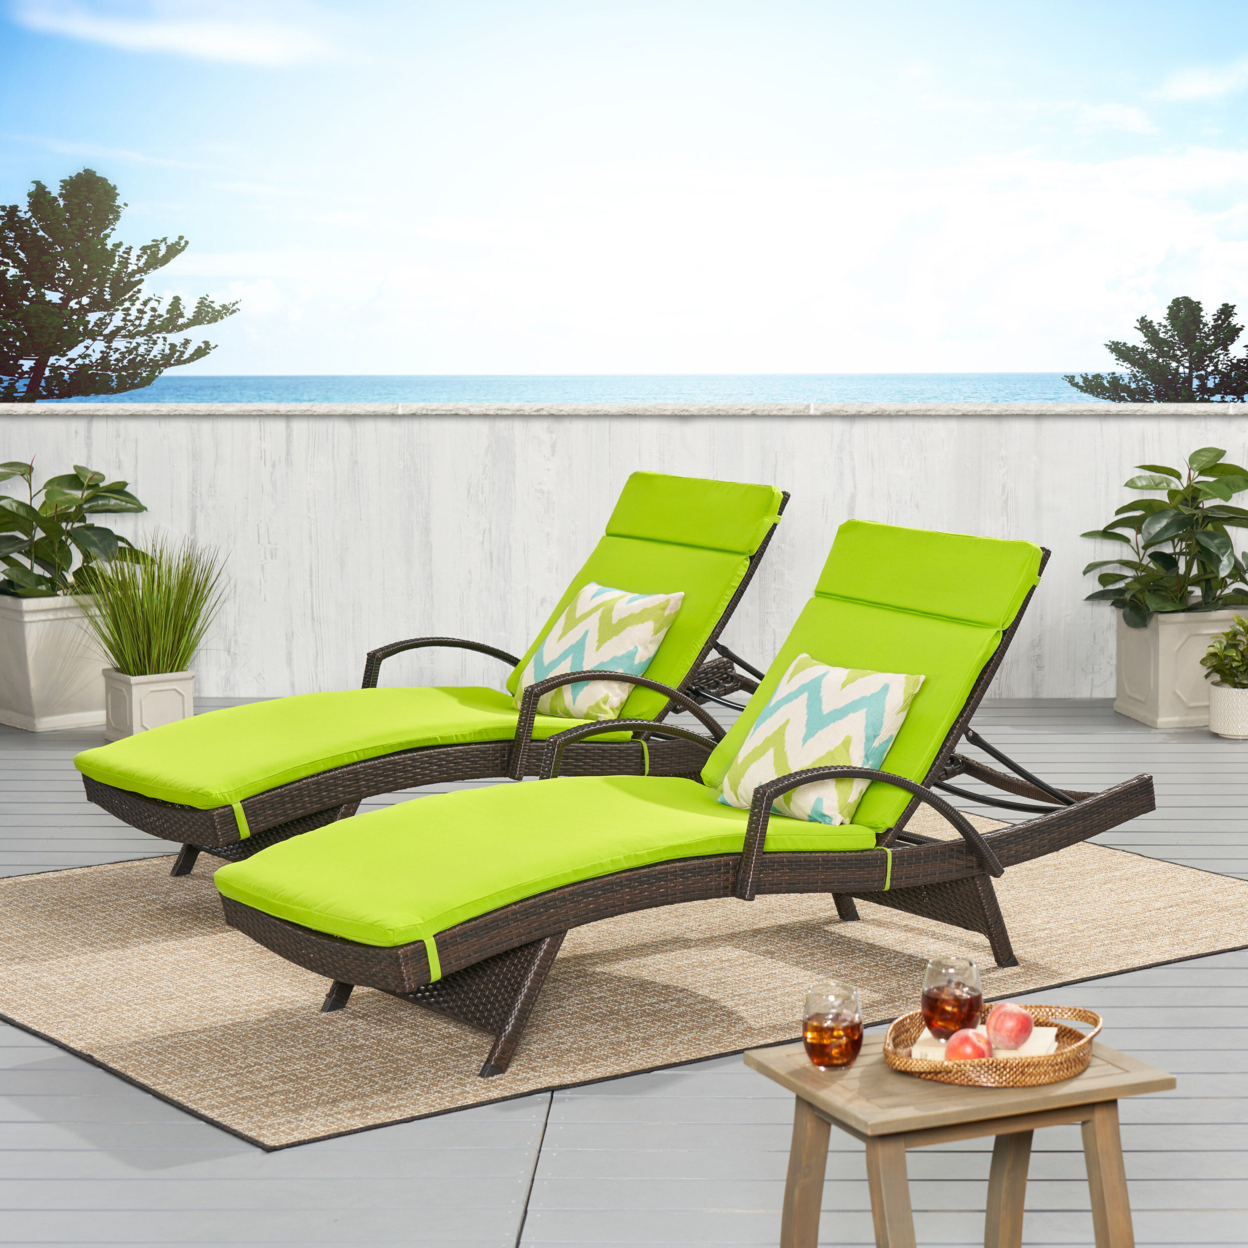 Lakeport Outdoor Wicker Armed Chaise Lounge Chairs With Cushions (set Of 2) - Green Cushion